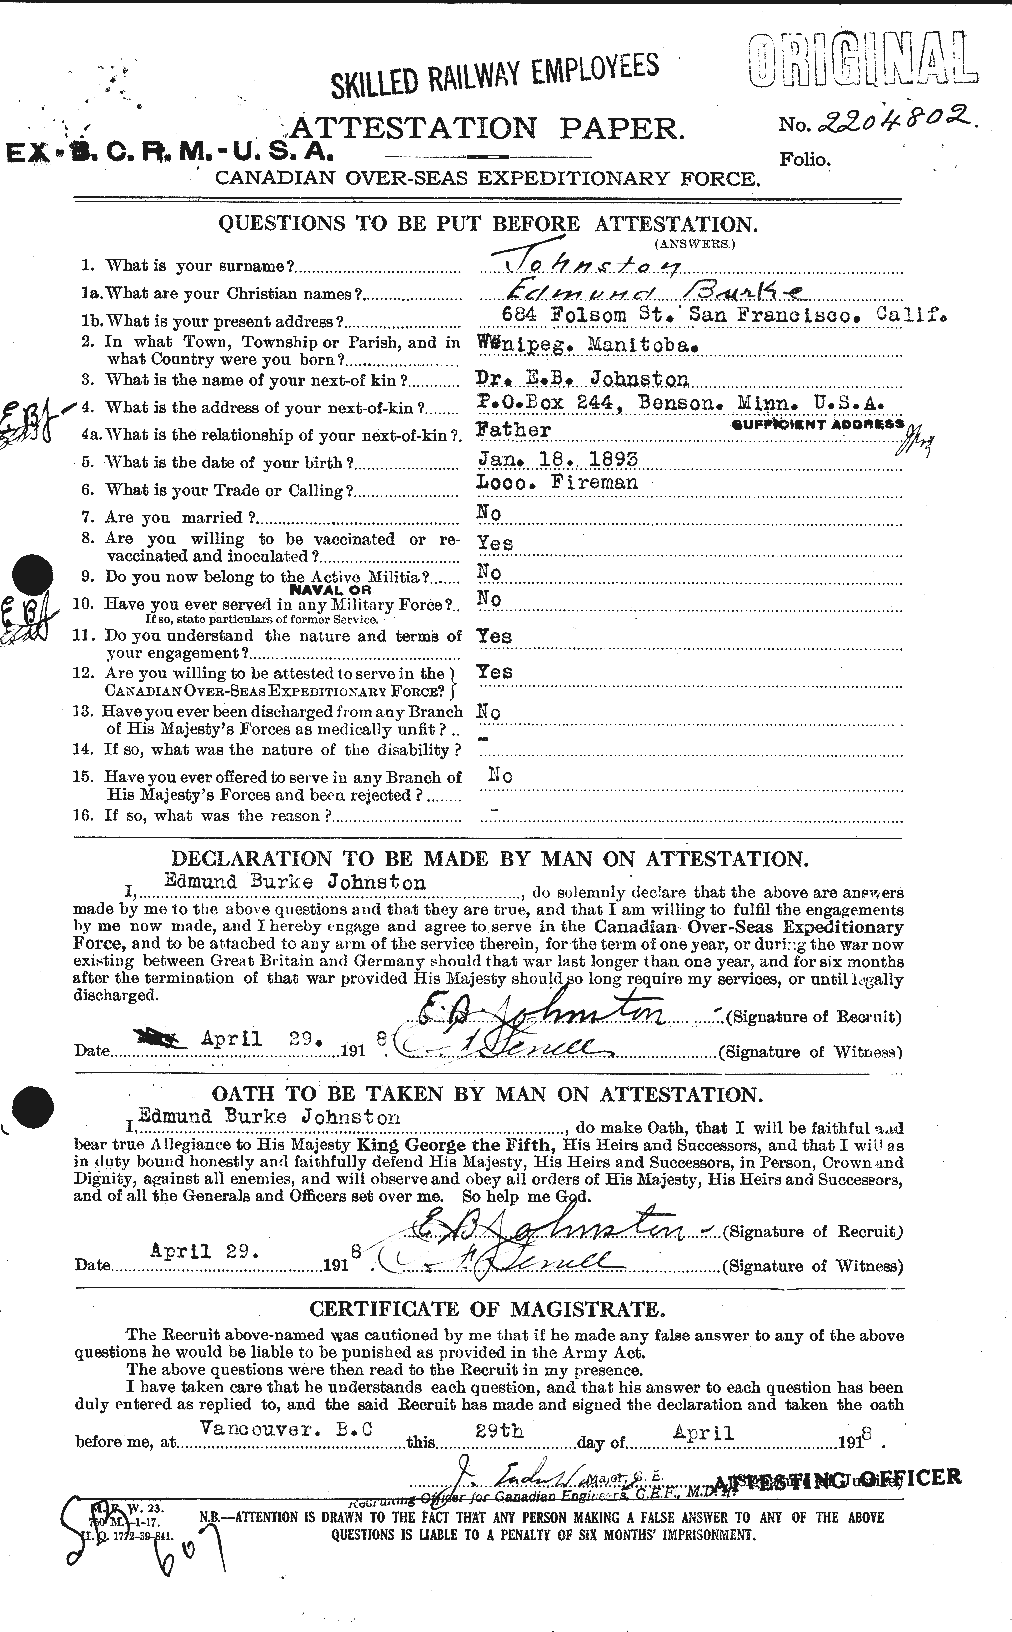 Personnel Records of the First World War - CEF 423208a